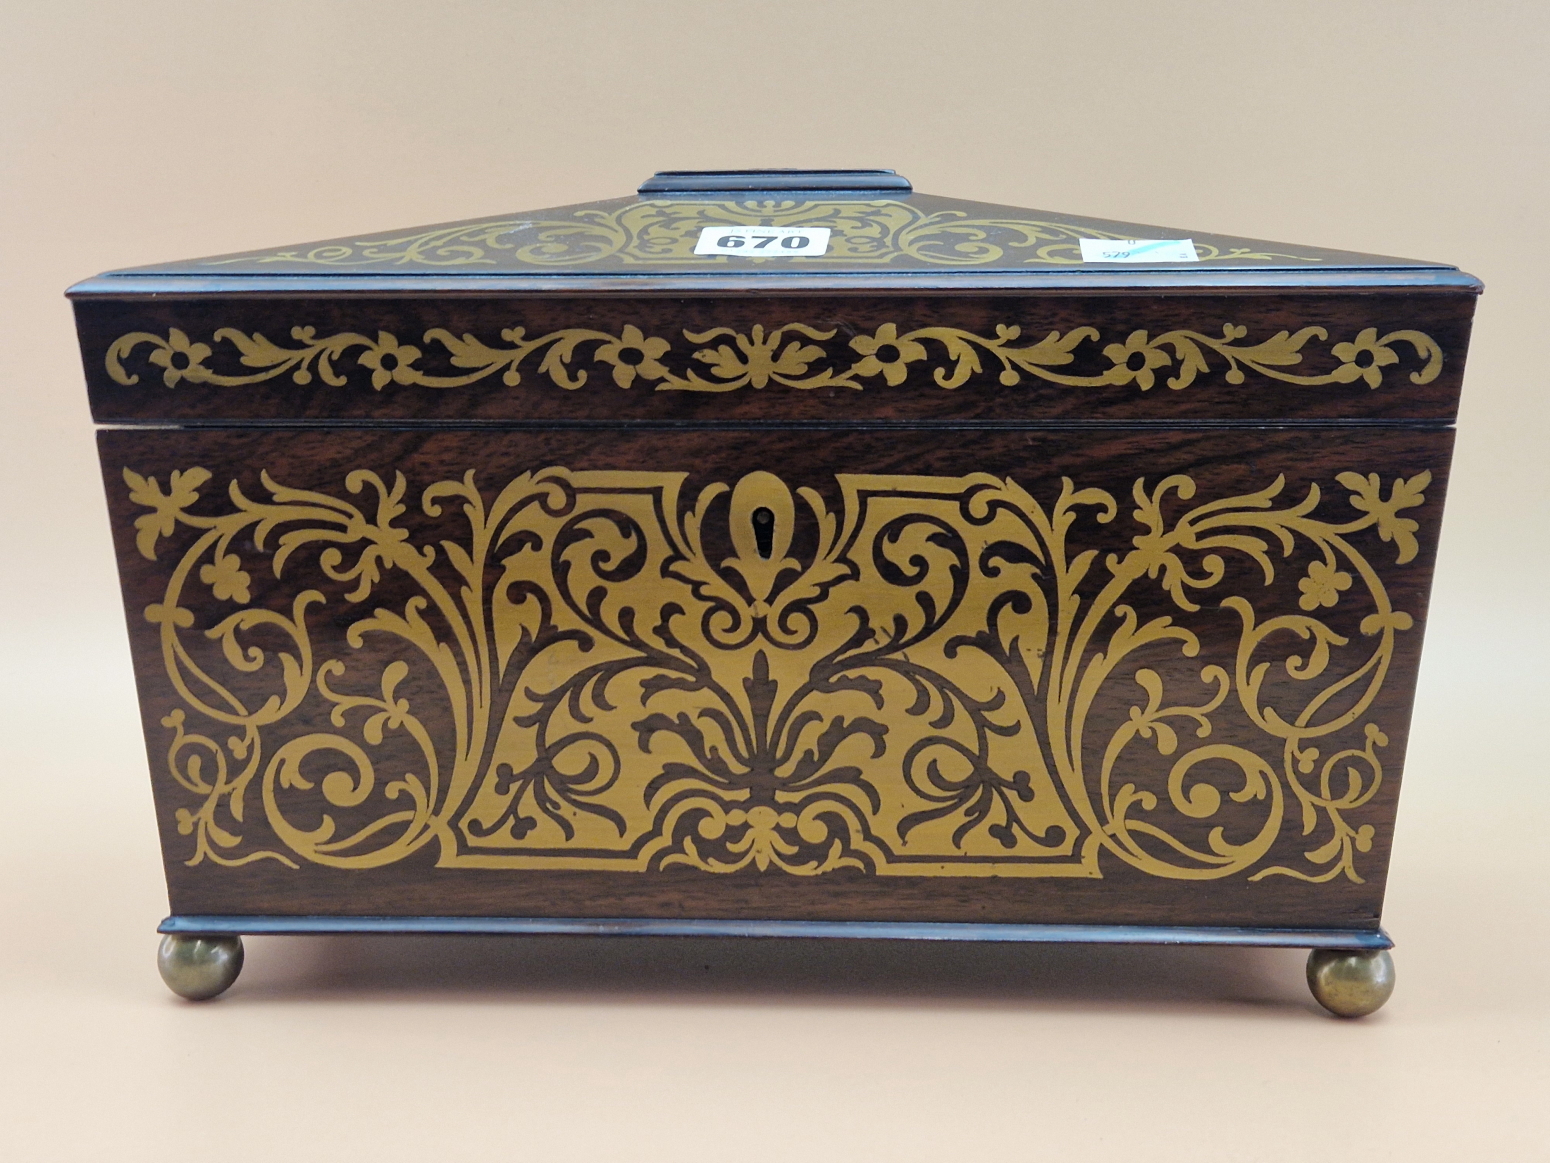 A BRASS INLAID ROSEWOOD SARCOPHAGUS SHAPED REGENCY TEA CADDY CONTAINING TWO CANISTERS AND A GLASS M - Image 2 of 8